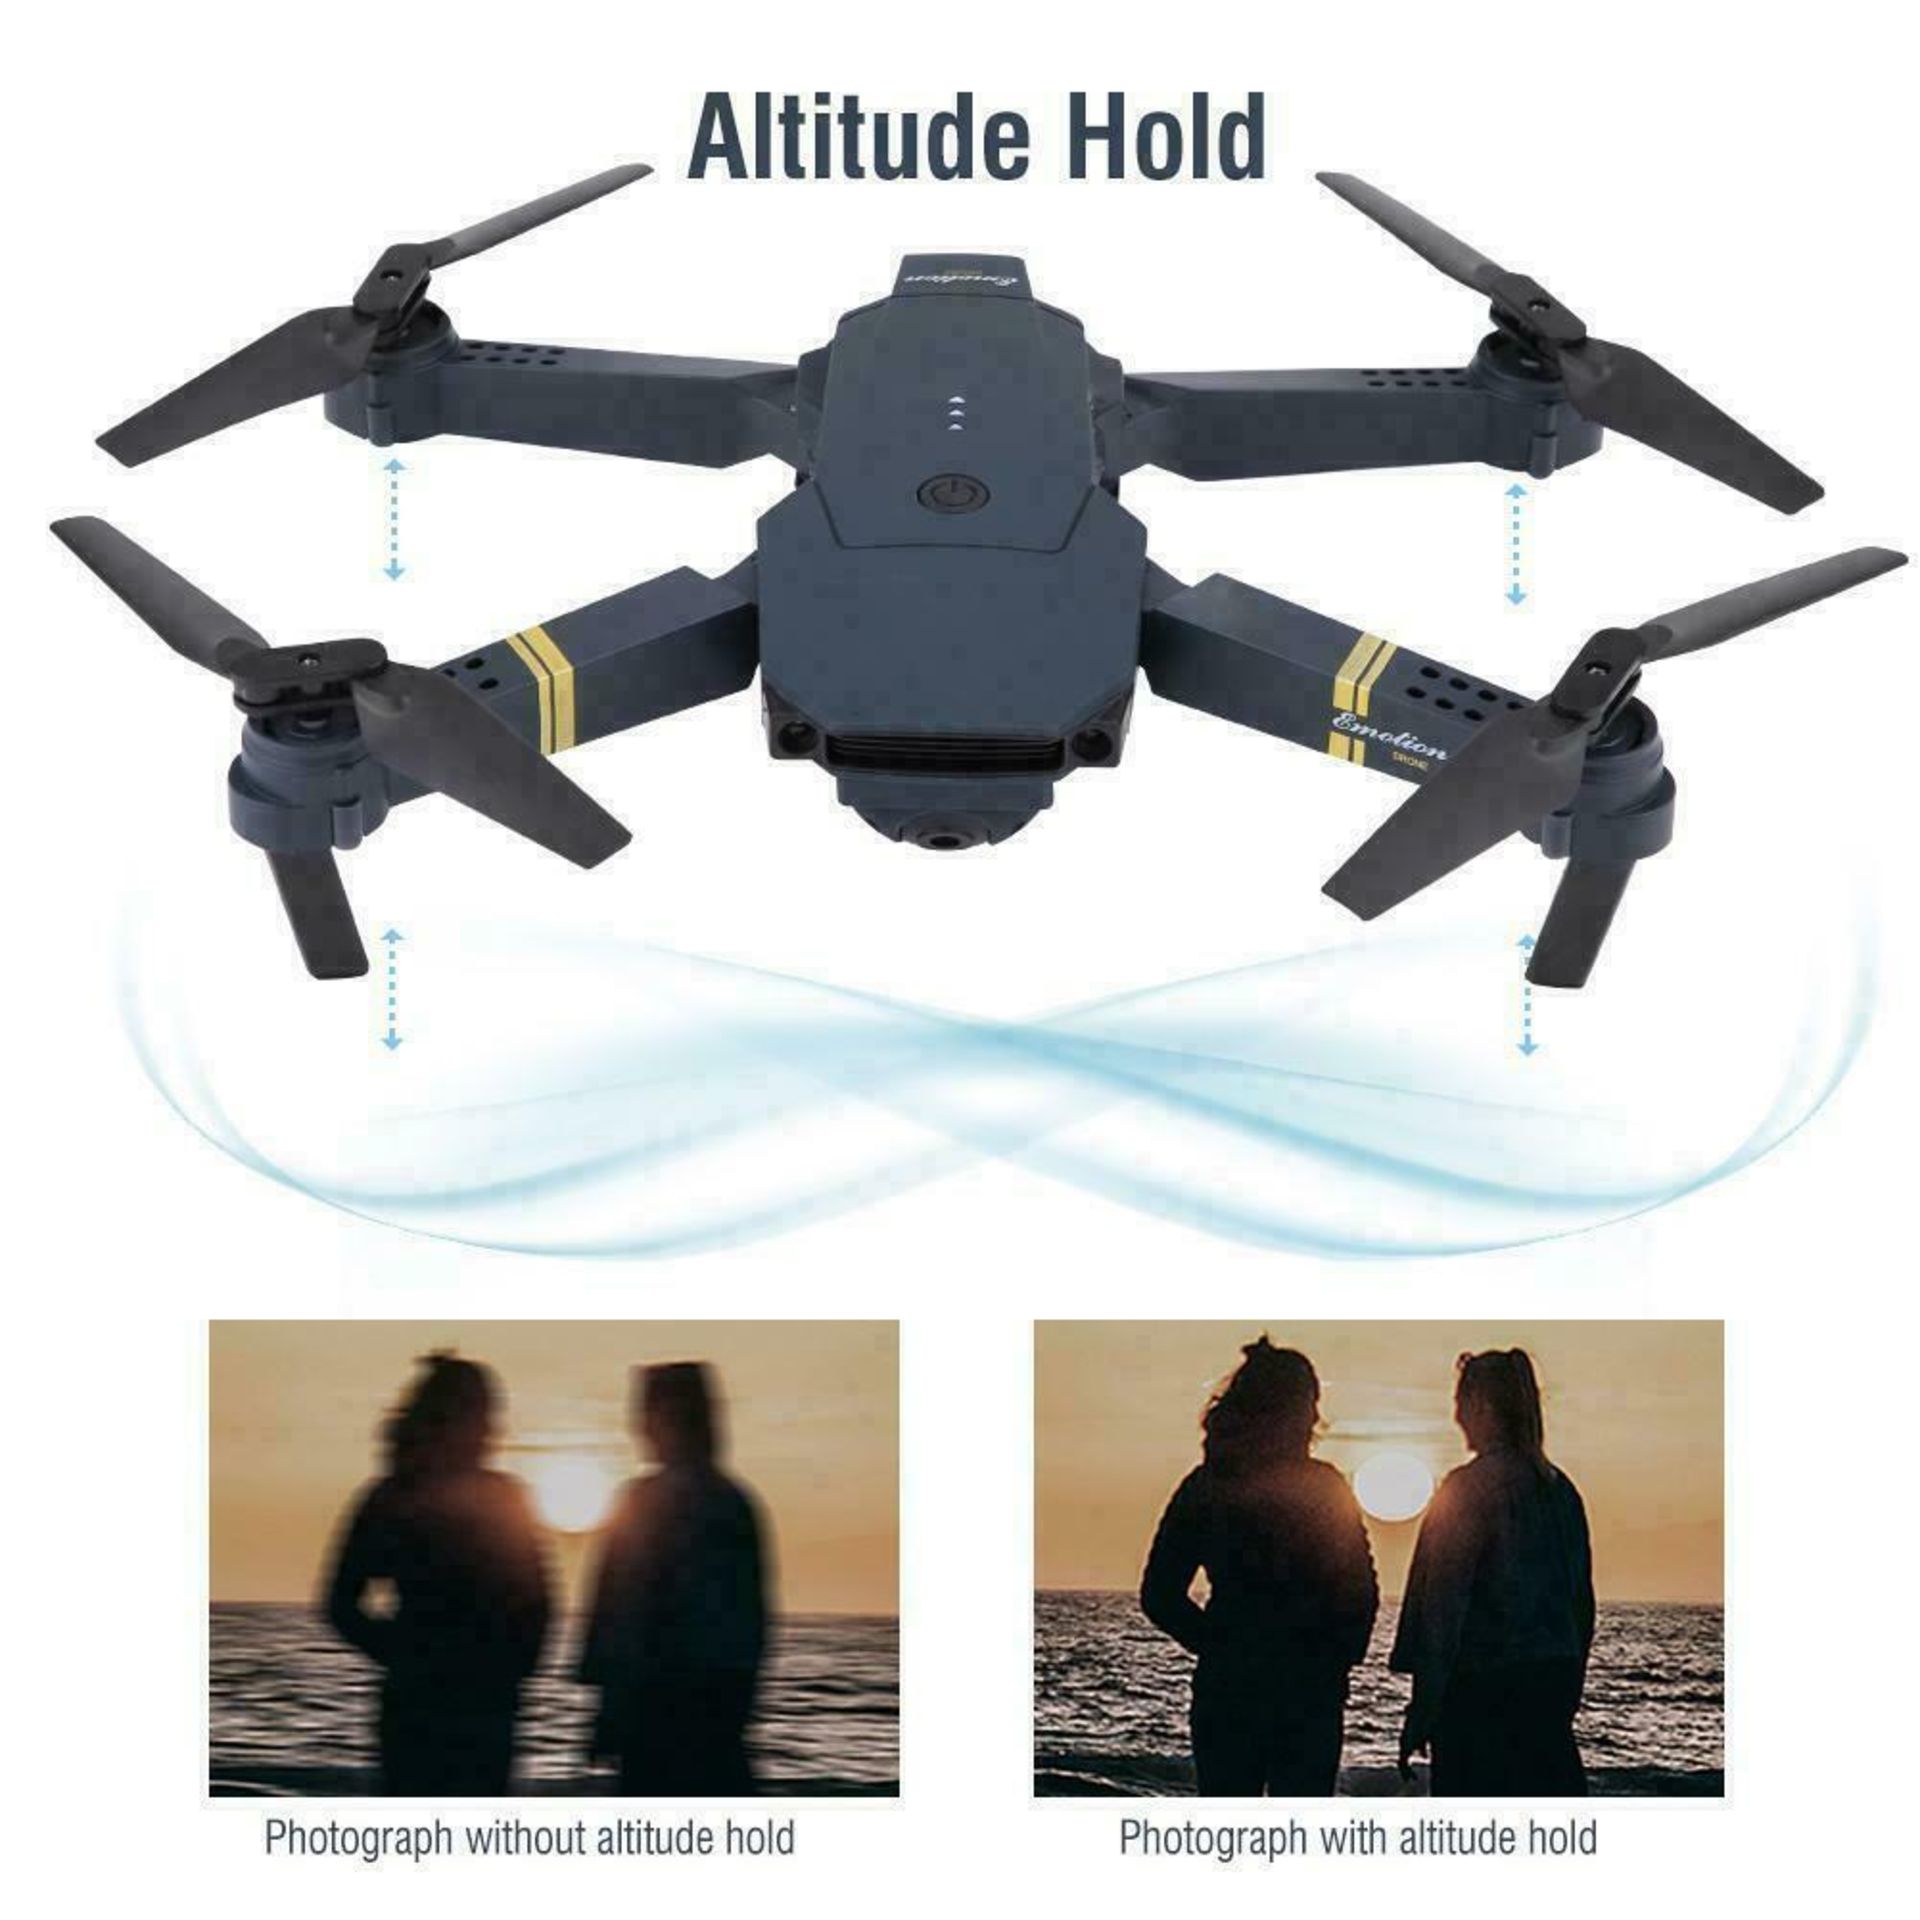 DRONE X REMOTE CONTROL QUADCOPTER 1080P HD CAMERA - THE LATEST TECH ONLY 7 OF THESE LEFT! - Image 6 of 9